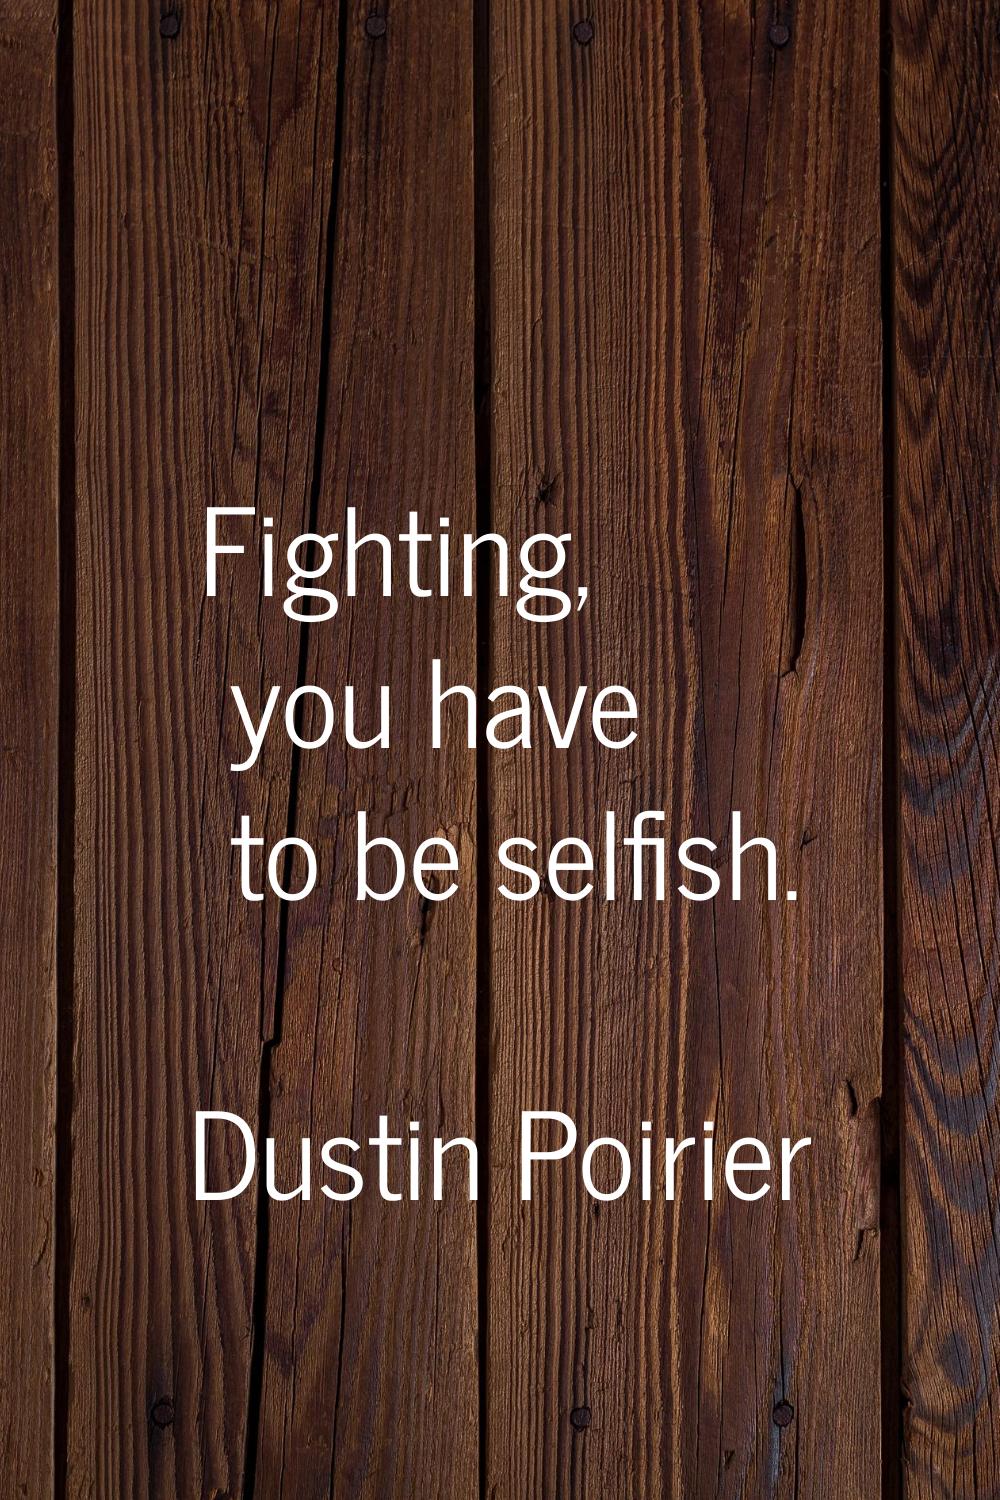 Fighting, you have to be selfish.